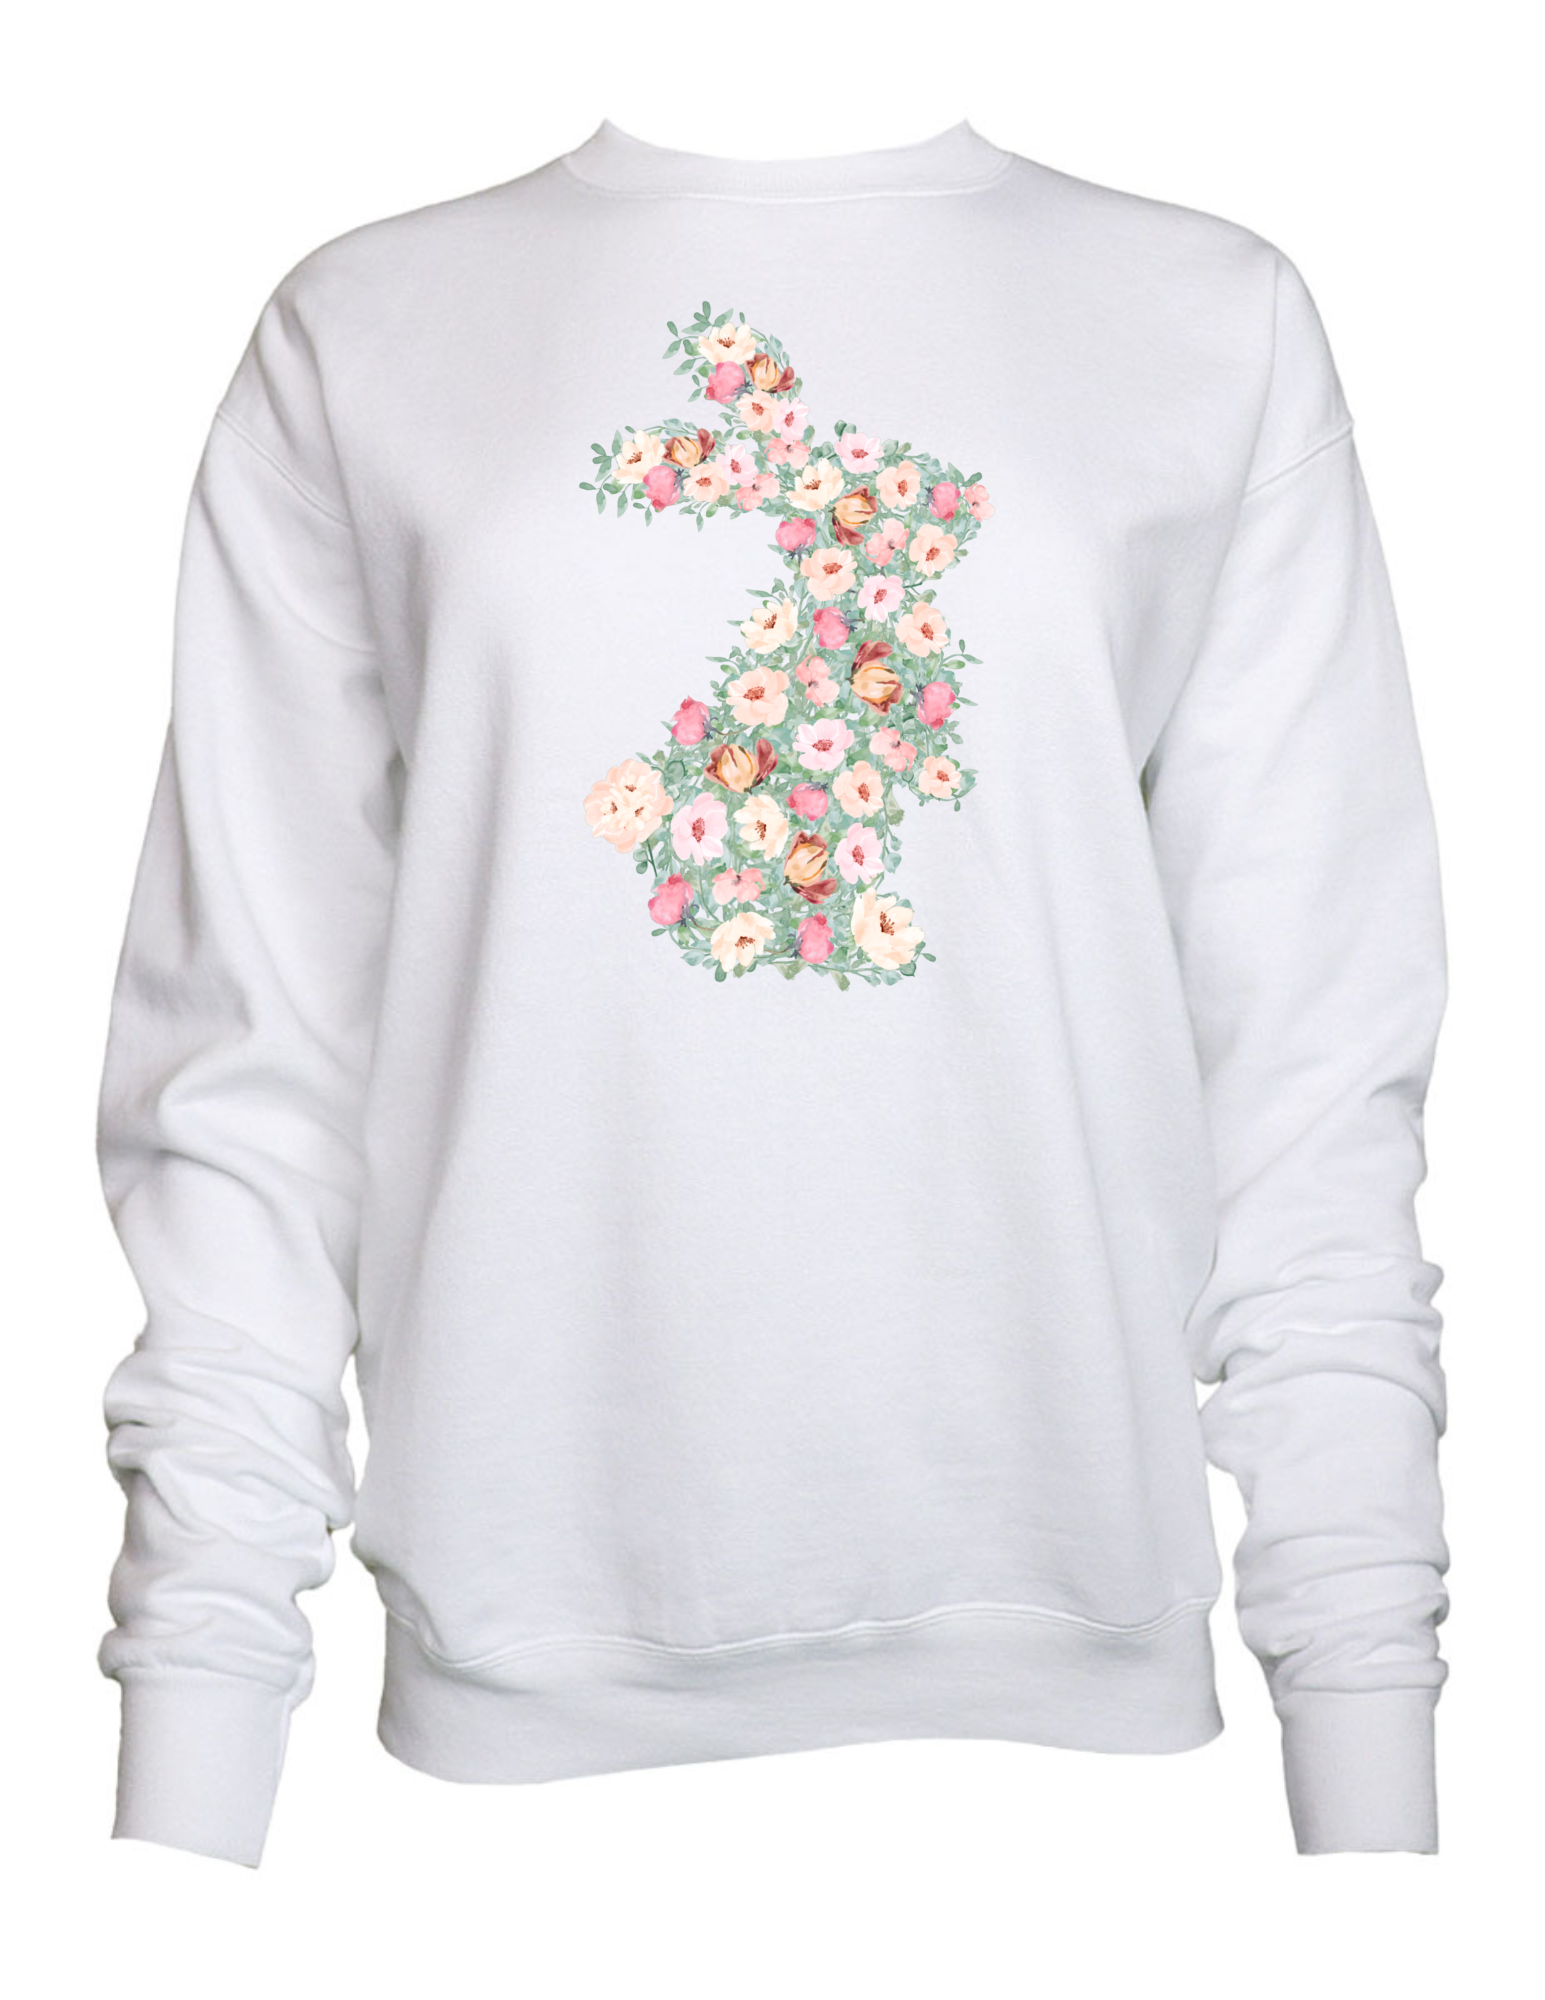 Floral Bunny Graphic Shirt